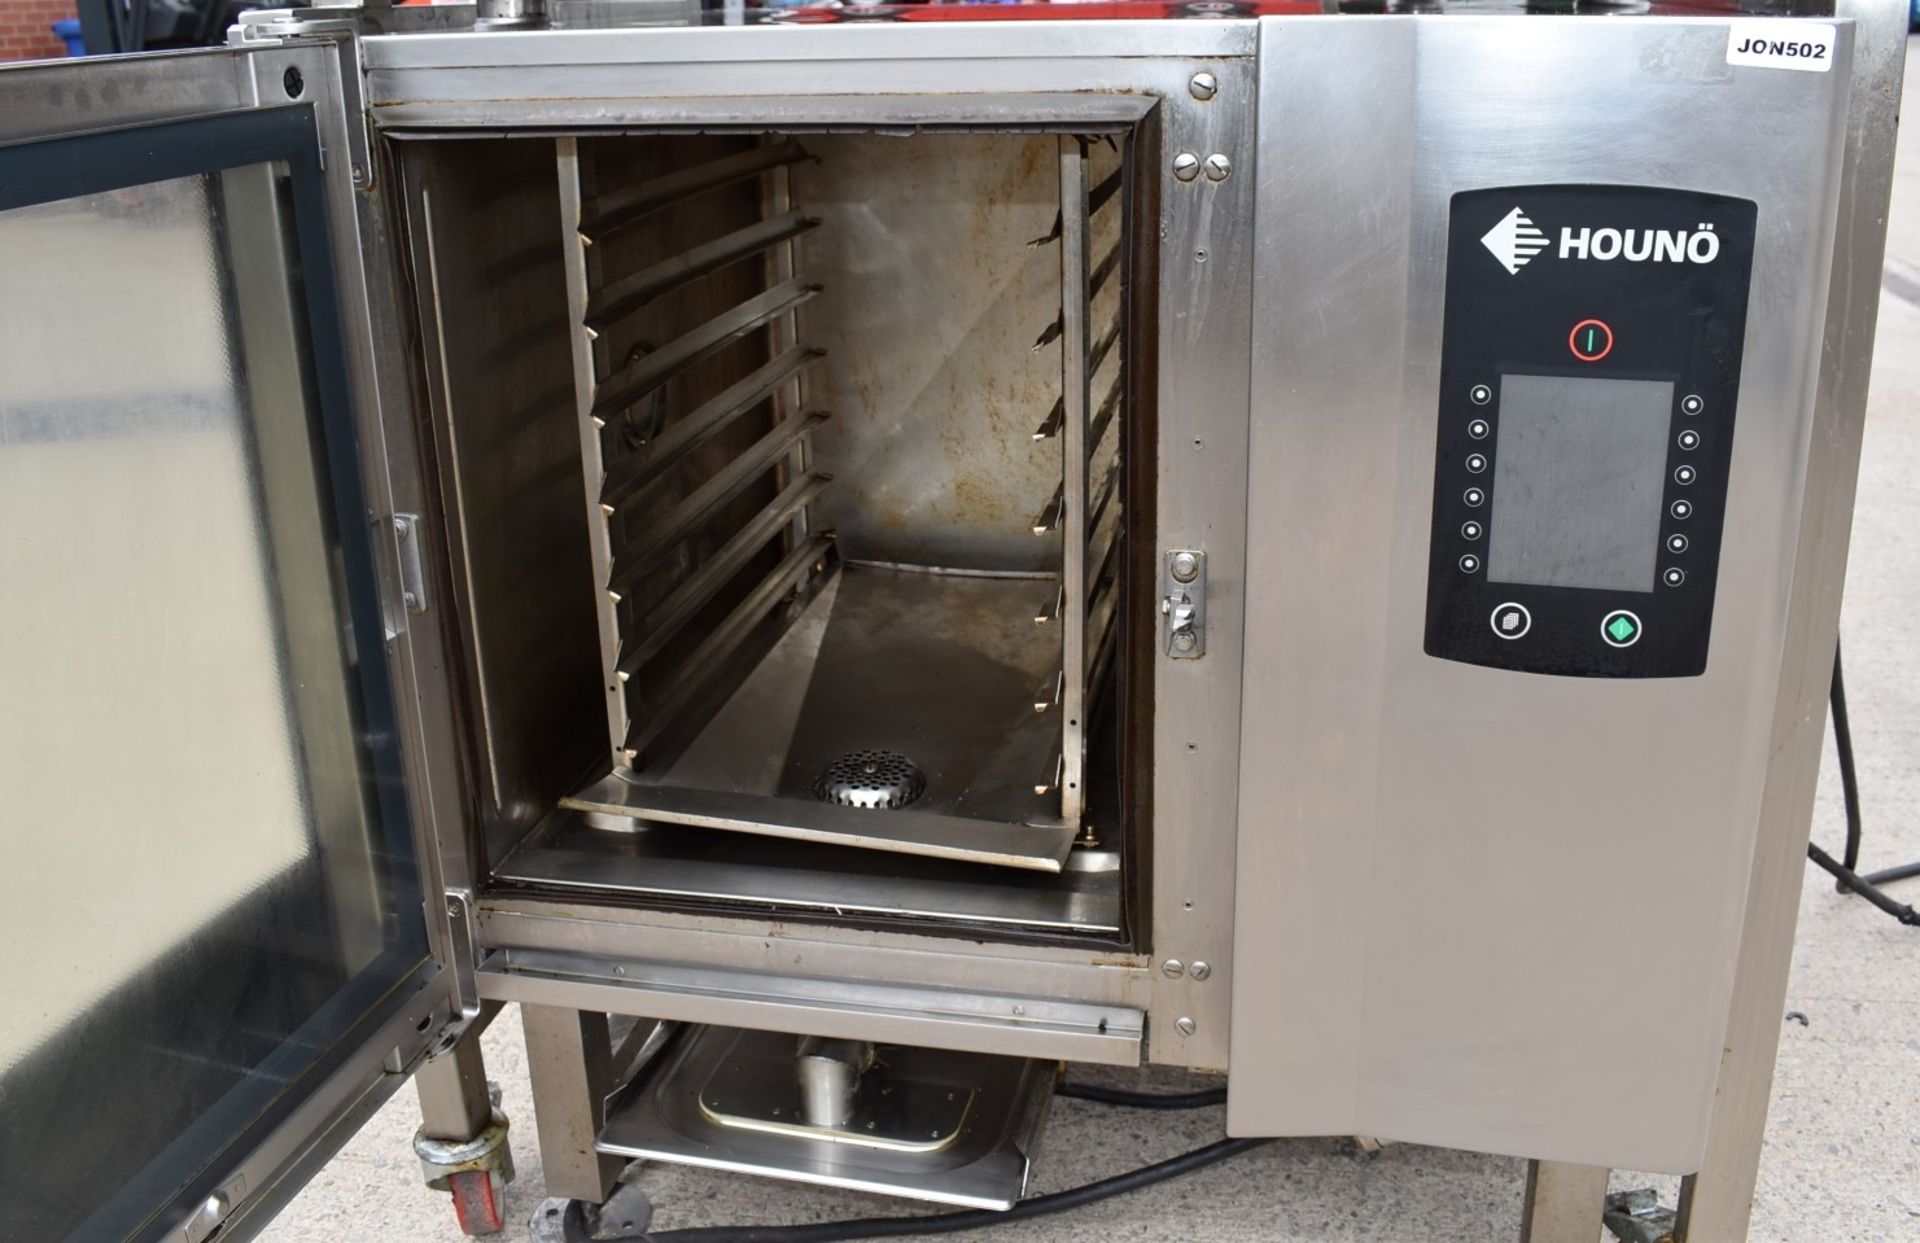 1 x Houno Electric Combi Oven and Fri-jado Rotisserie Oven Combo With Stand - 3 Phase - Image 14 of 22